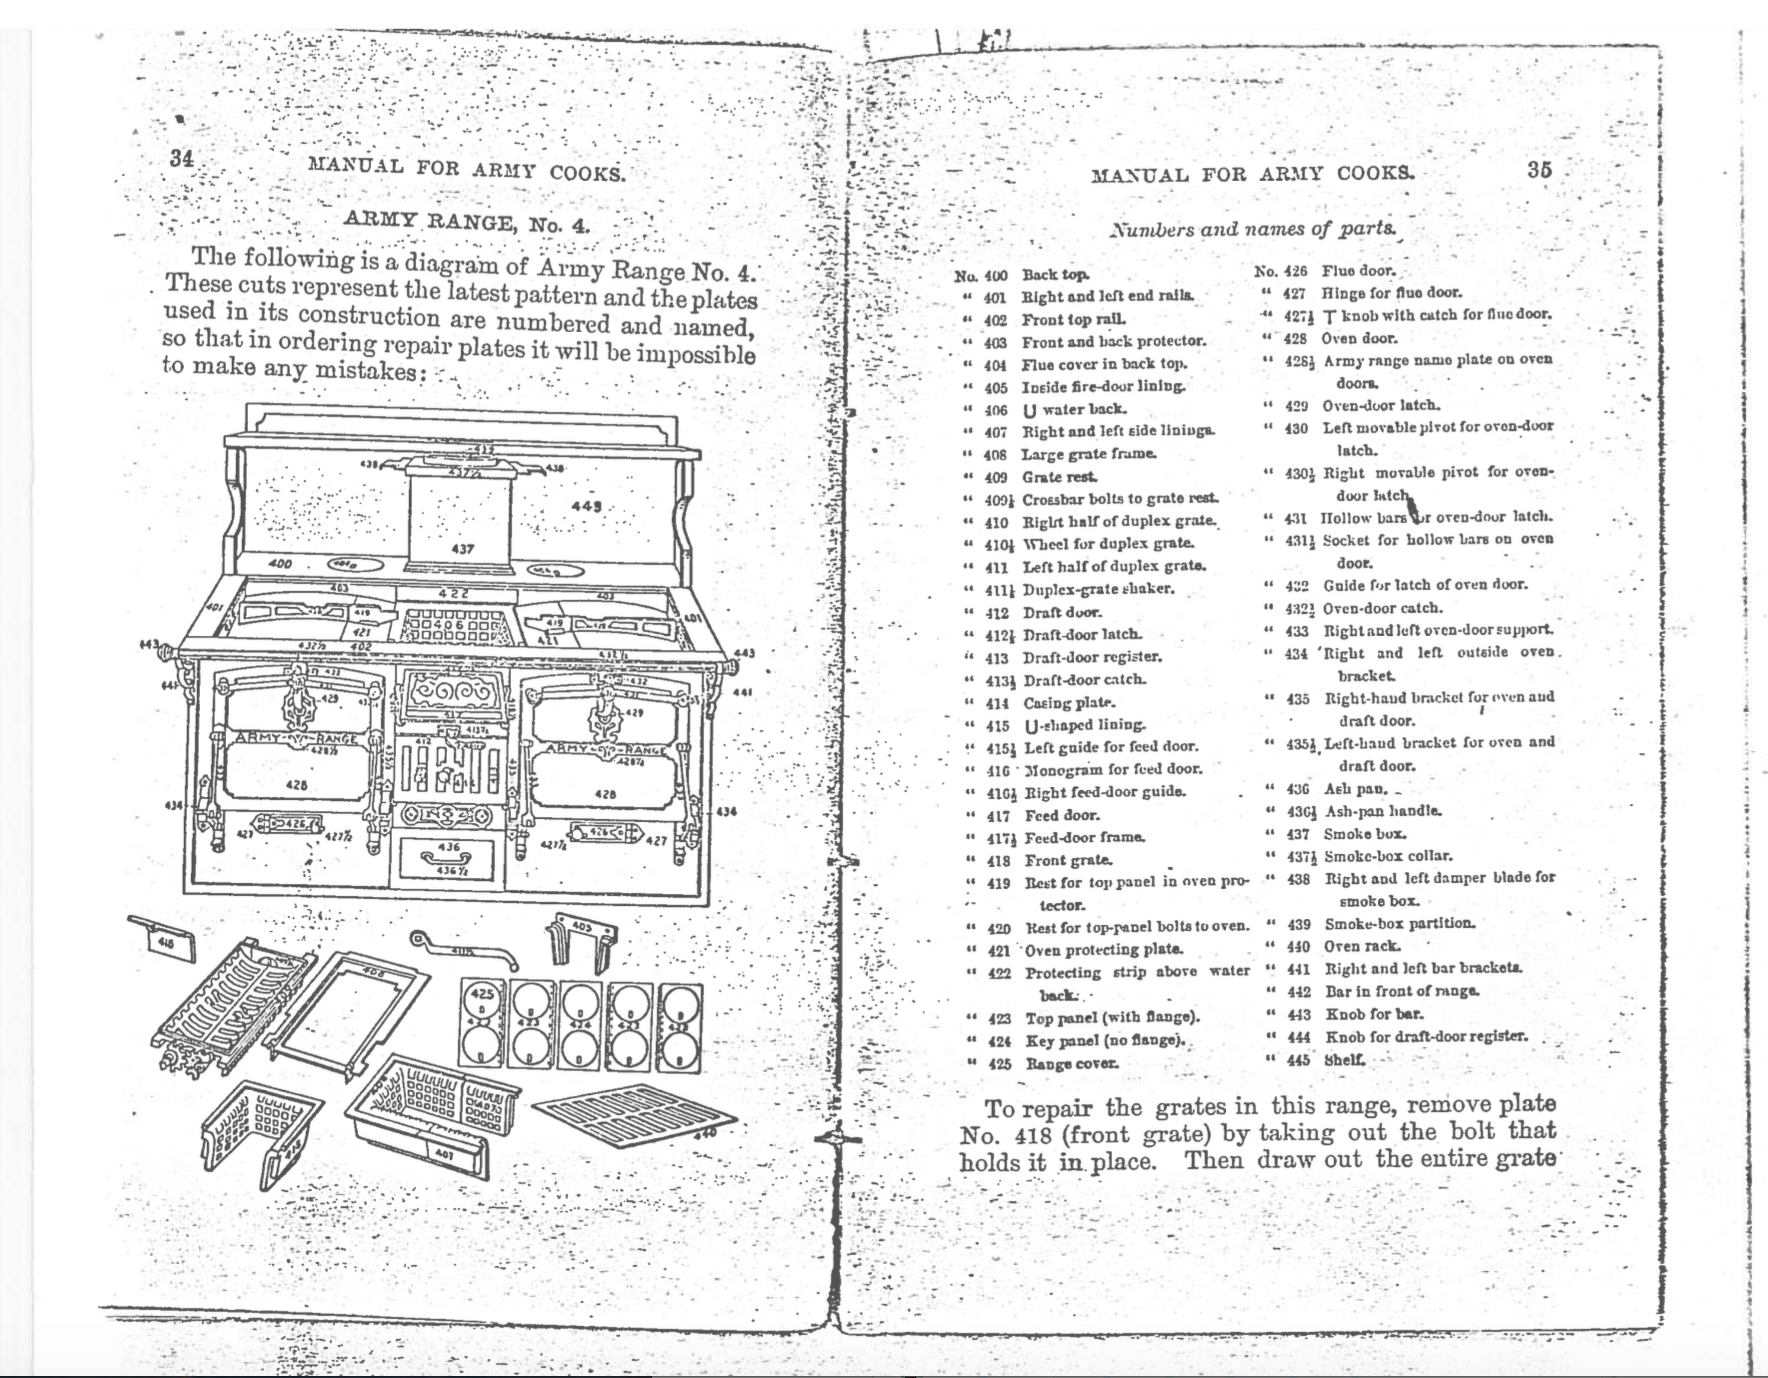  Figure 10. Schematic of a typical cast iron stove. (Manual for Army Cooks, 1883 in FOUN Archives). 